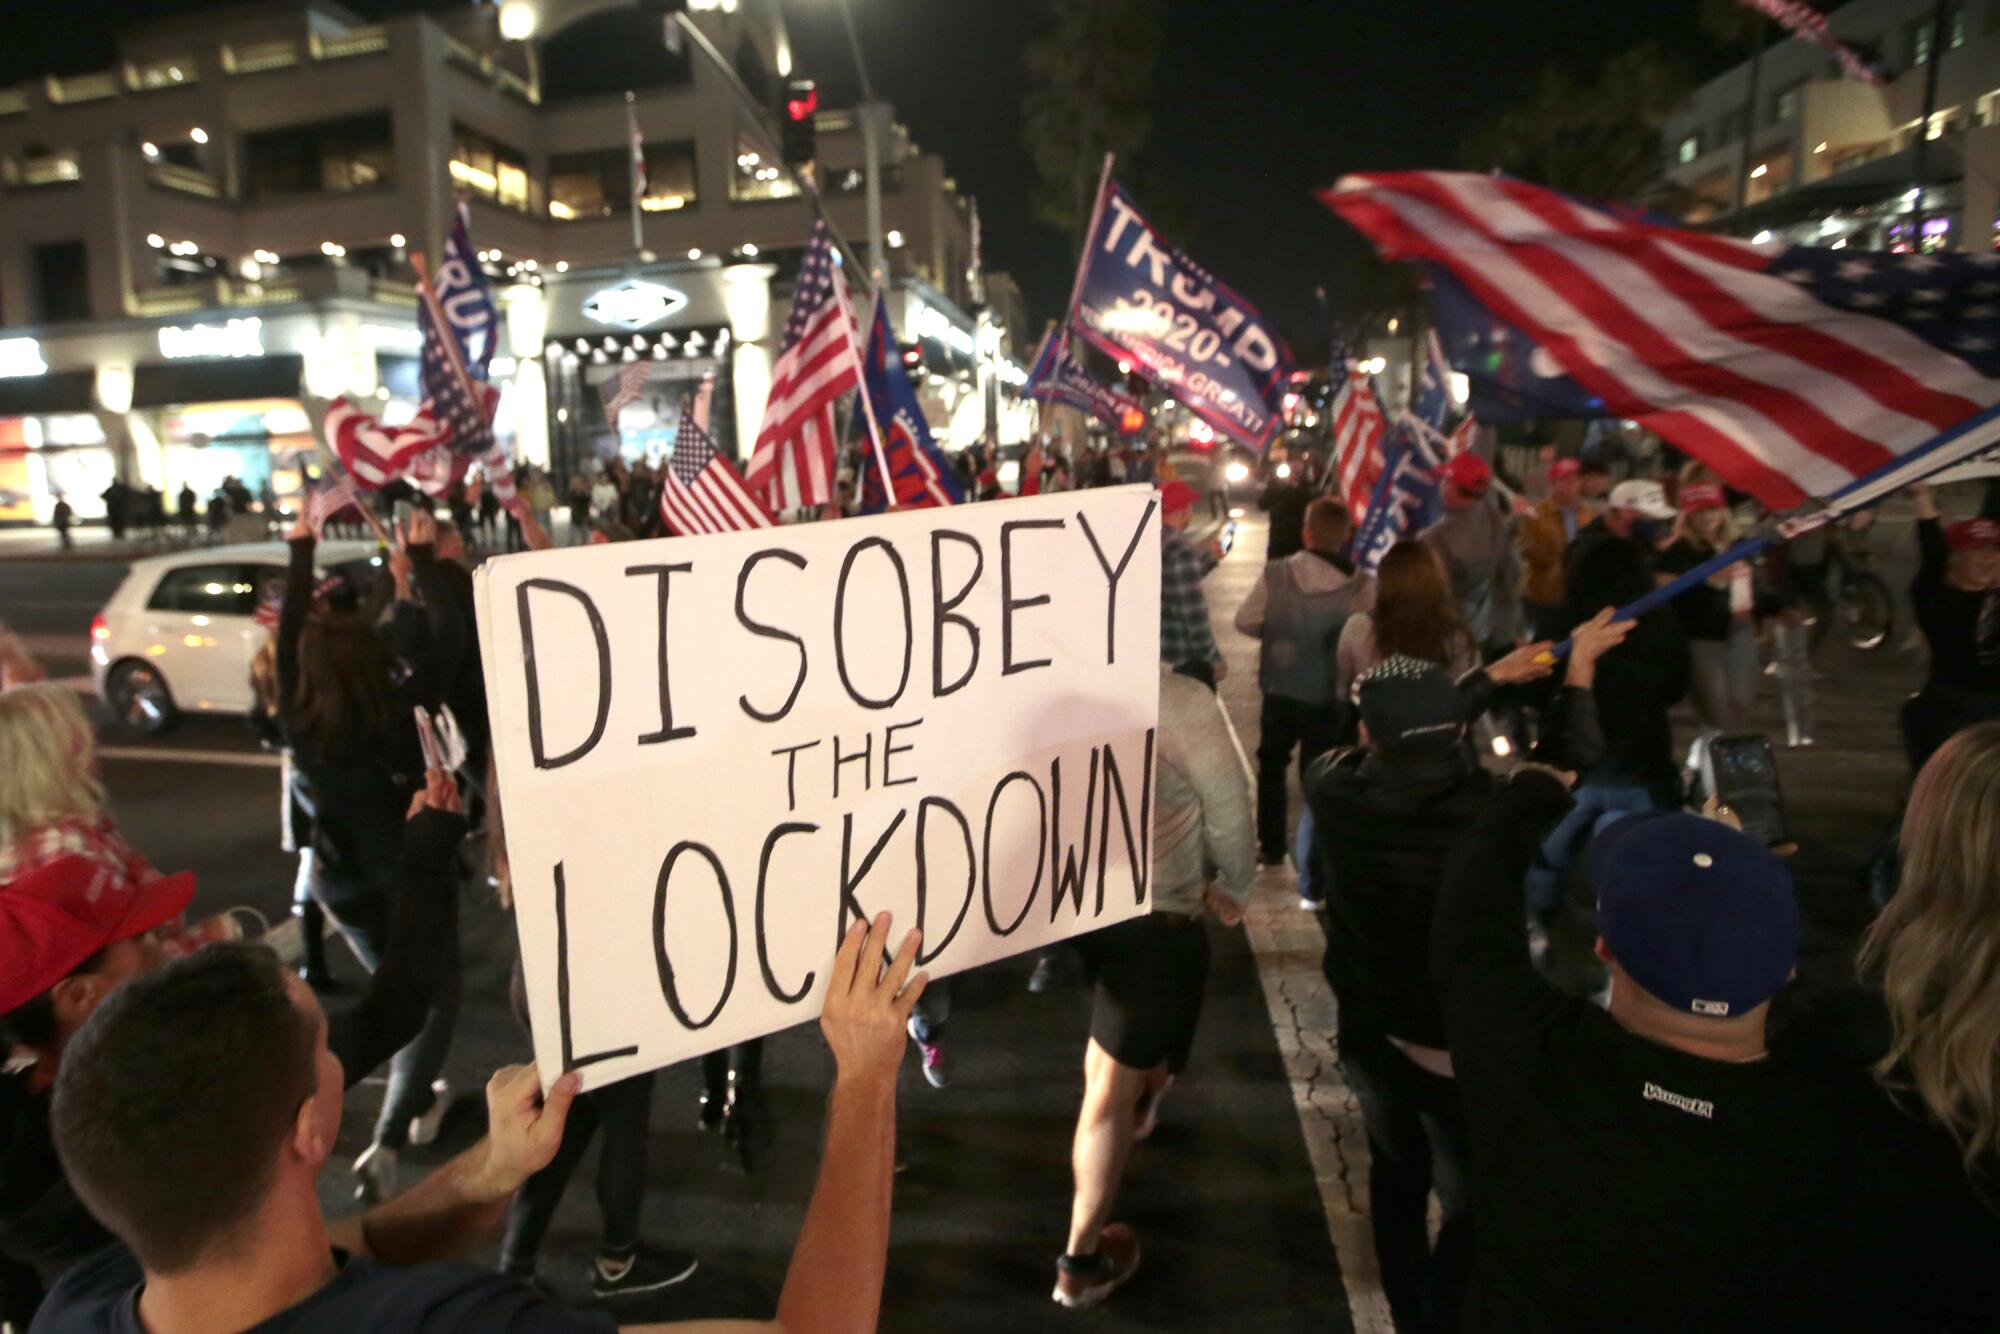 Among flag-carrying protesters, a man carries a sign that reads "Disobey the lockdown."